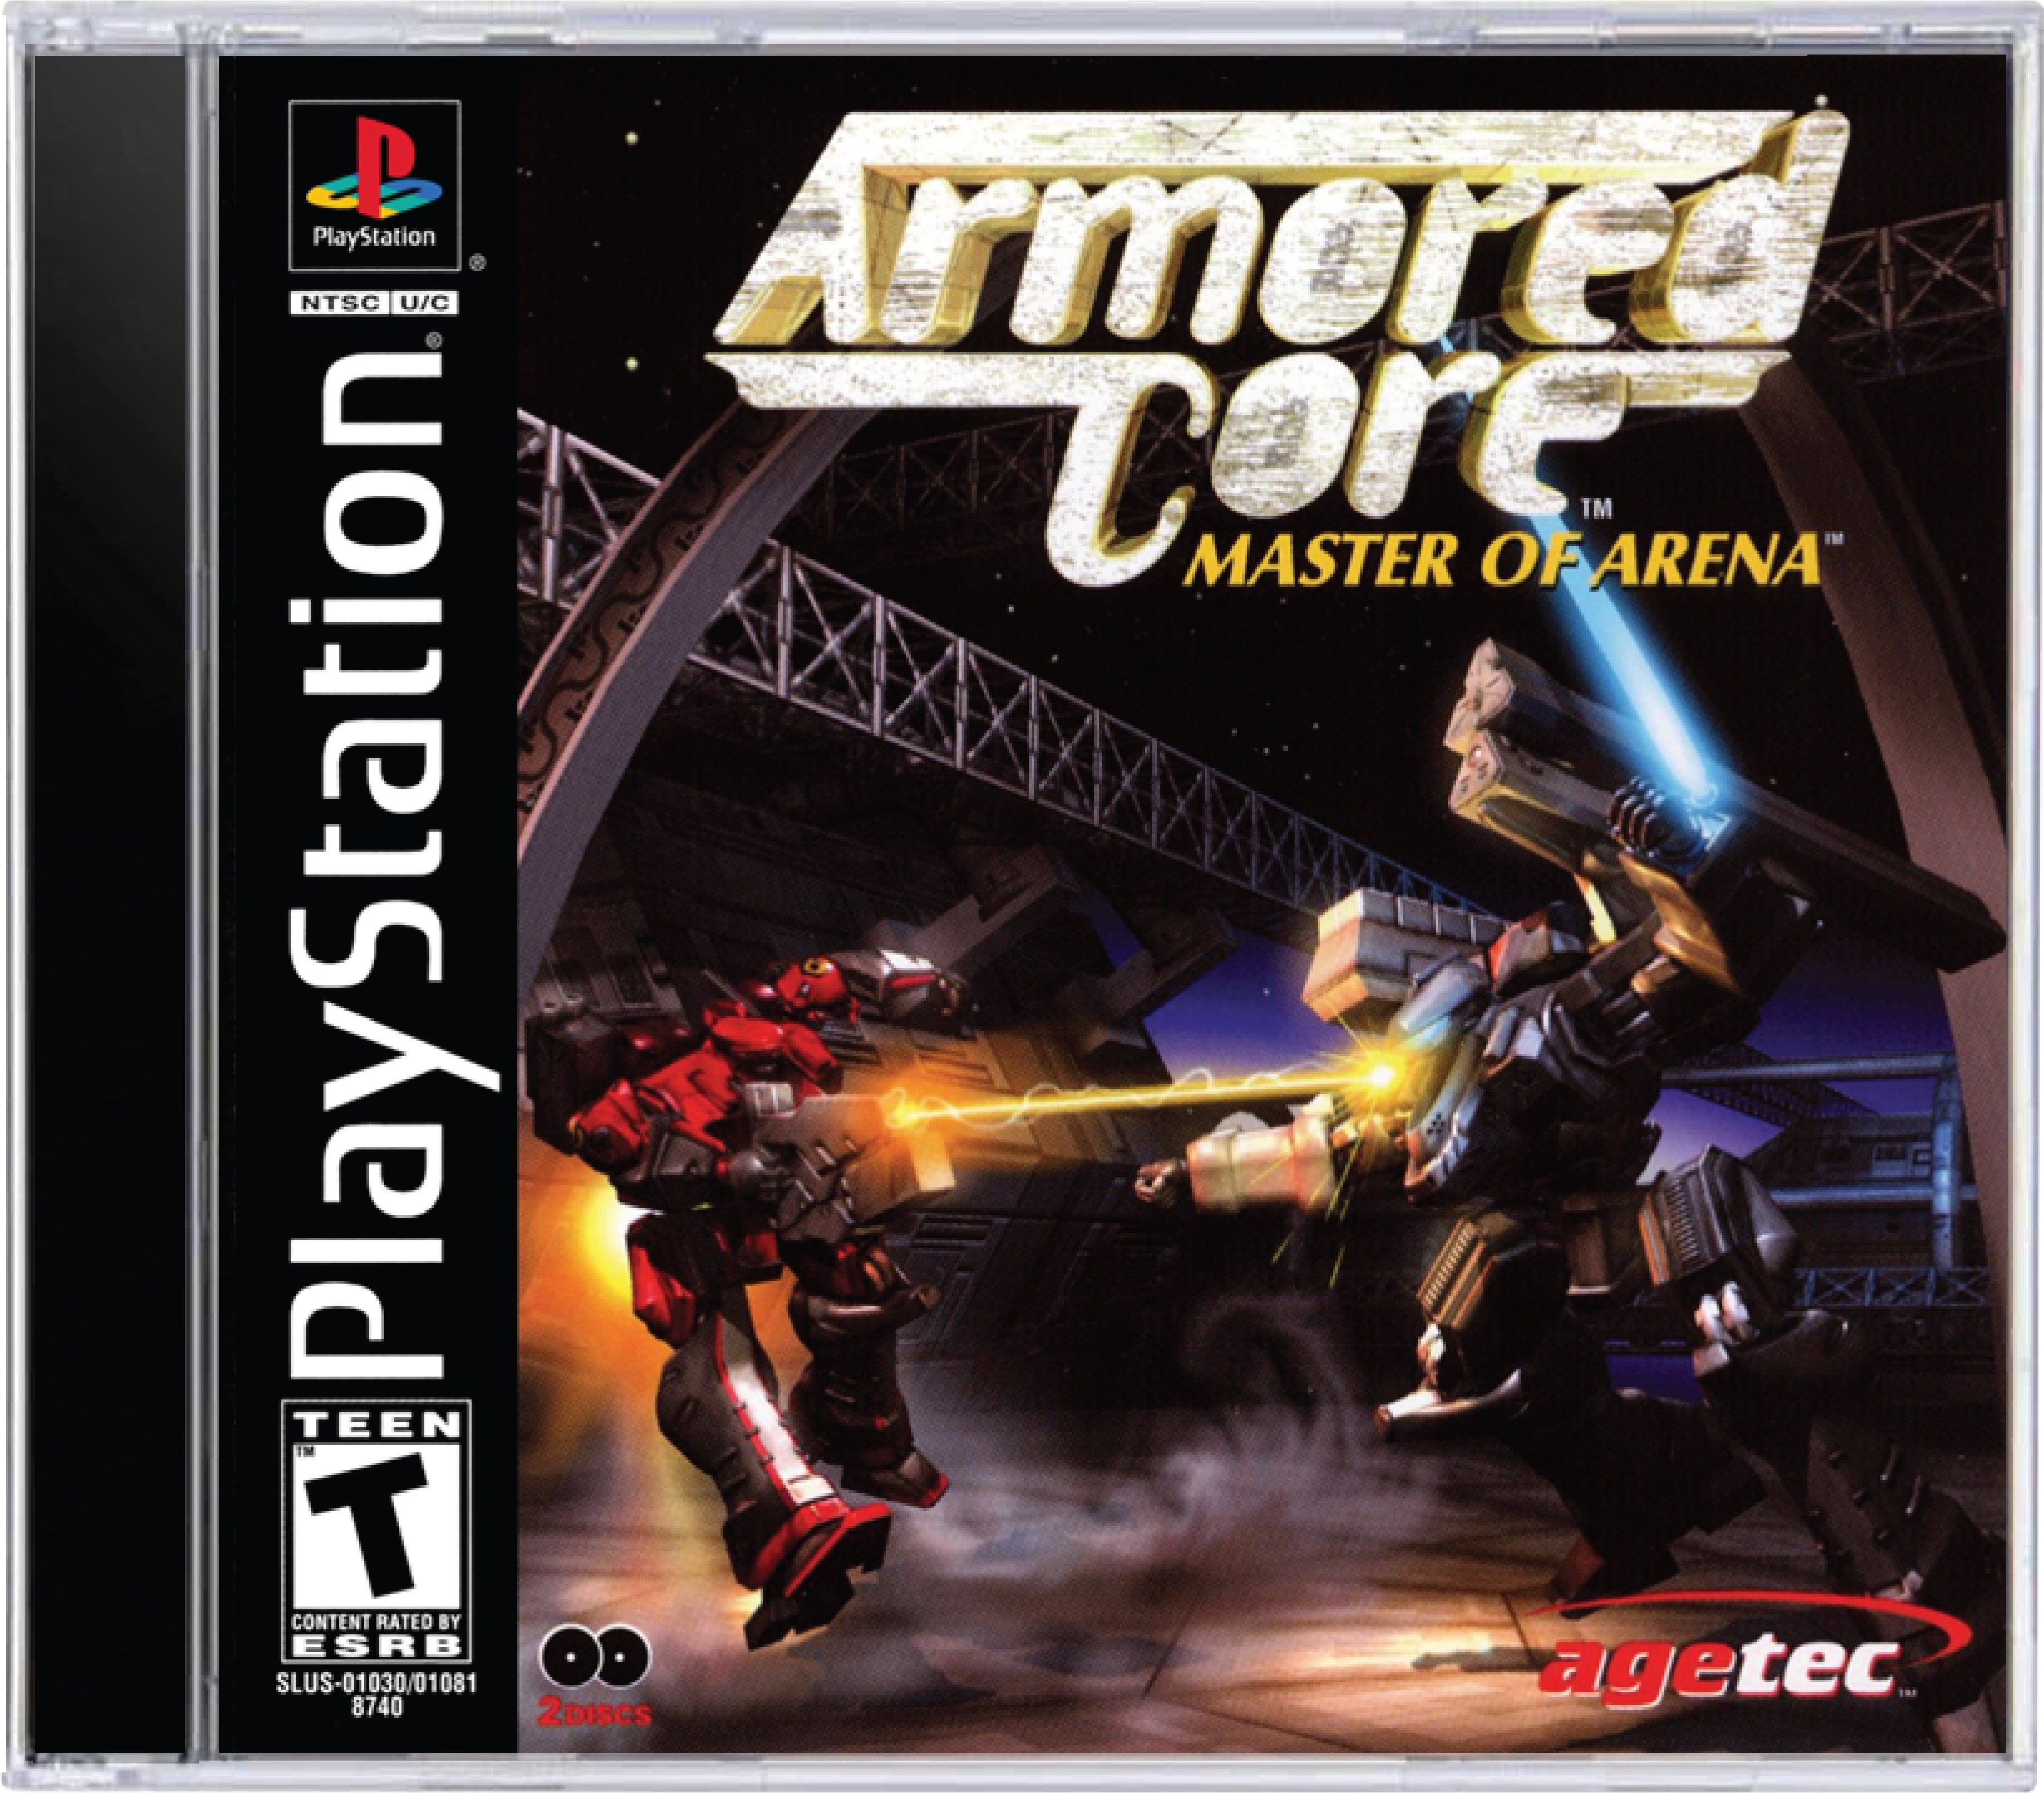 Armored Core Master of Arena Cover Art and Product Photo